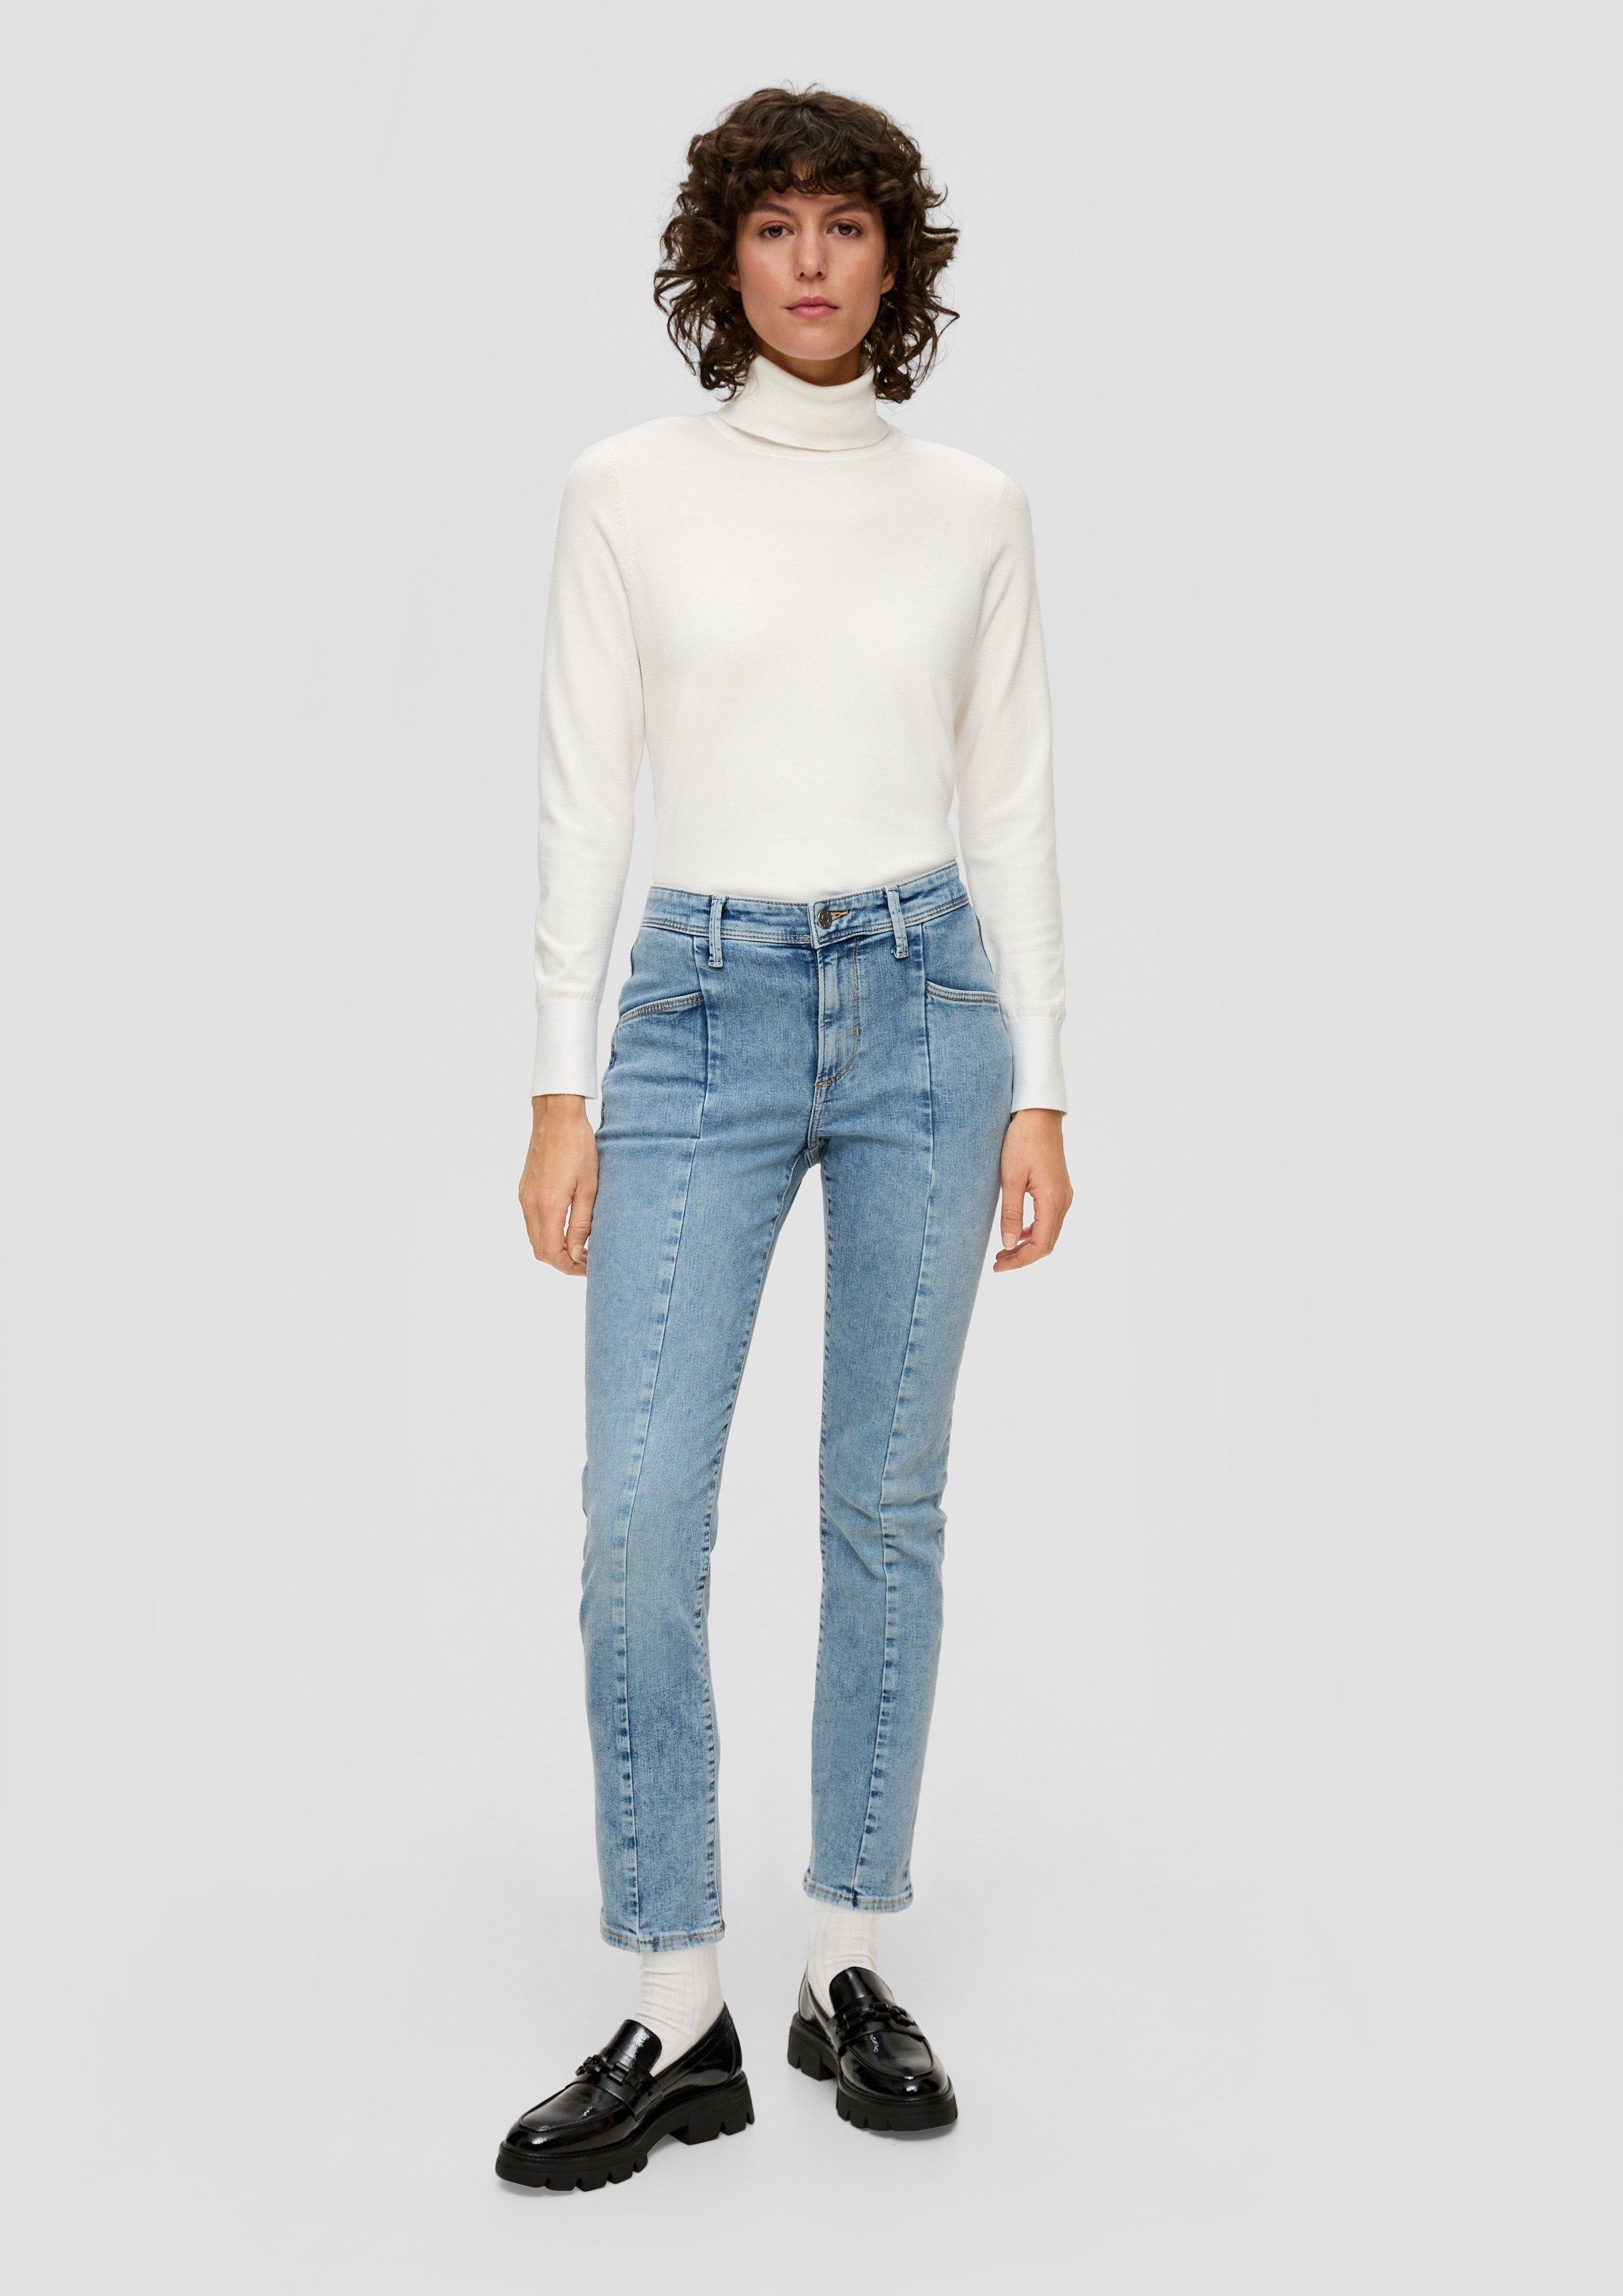 s.Oliver 7/8-Jeans Fit Slim Waschung, / Slim Mid Jeans / Ankle Rise Leg / Label-Patch, Teilungsnähte